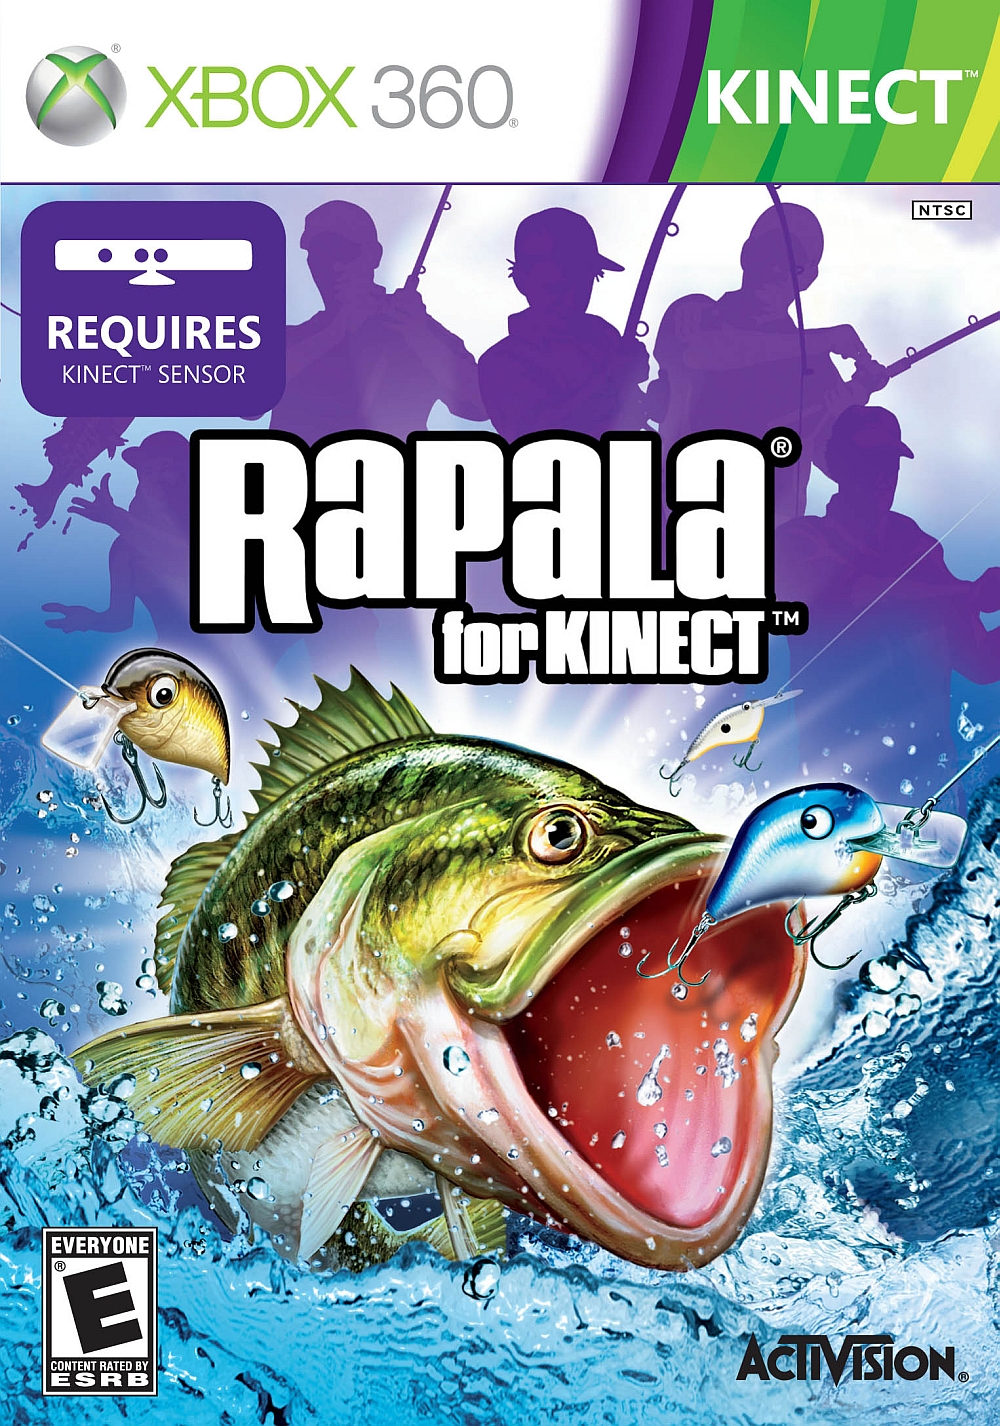 Rapala Screenshots, Pictures, Wallpapers - Xbox 360 - IGN